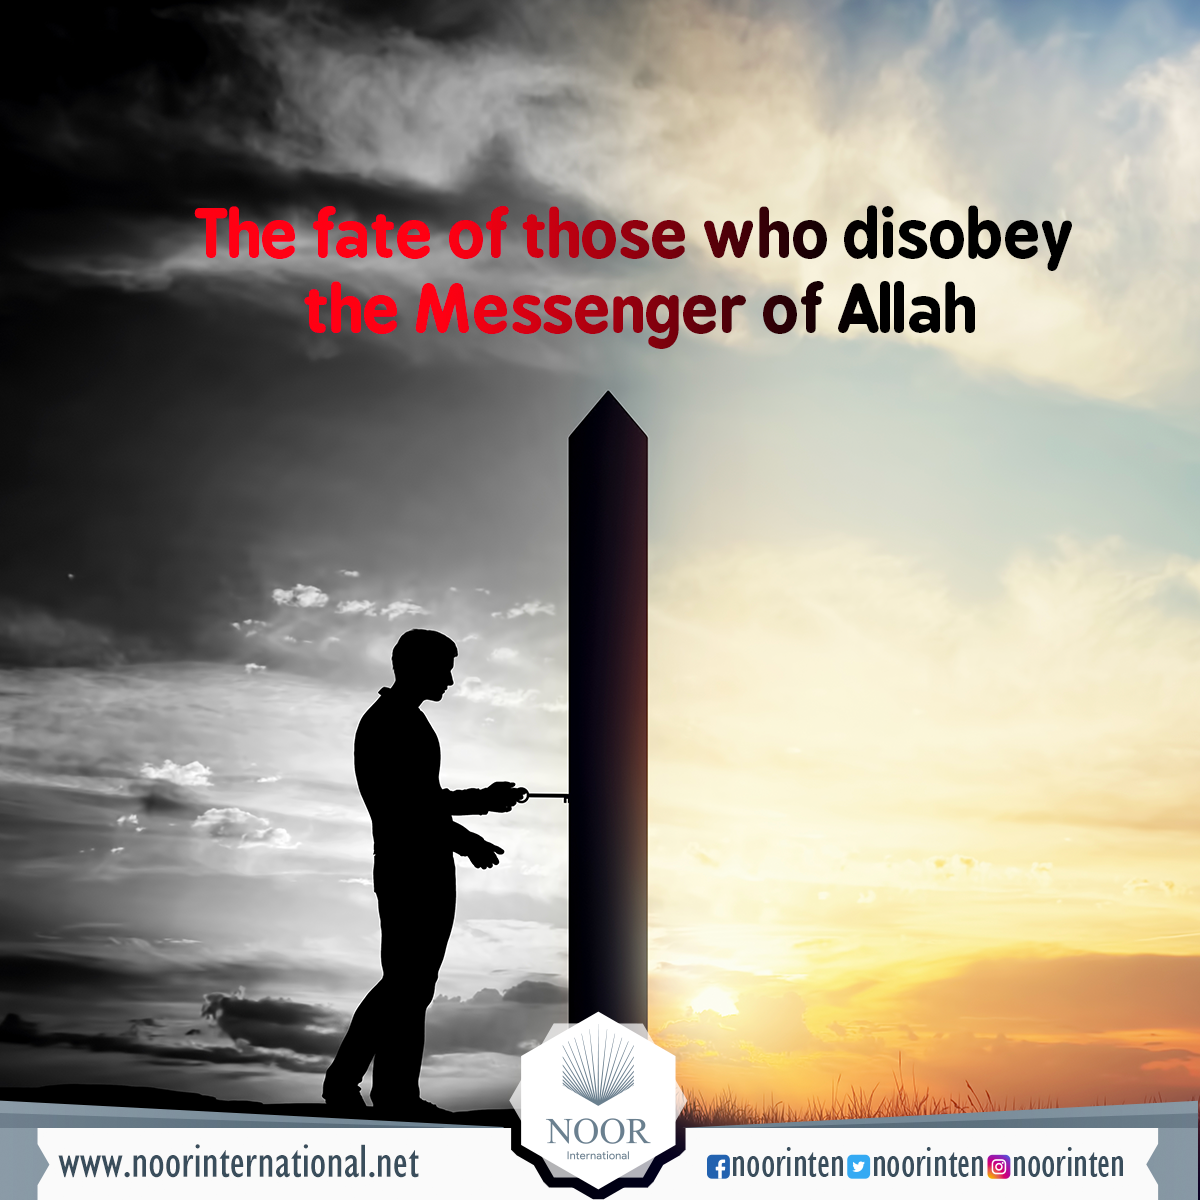 The fate of those who disobey the Messenger of Allah